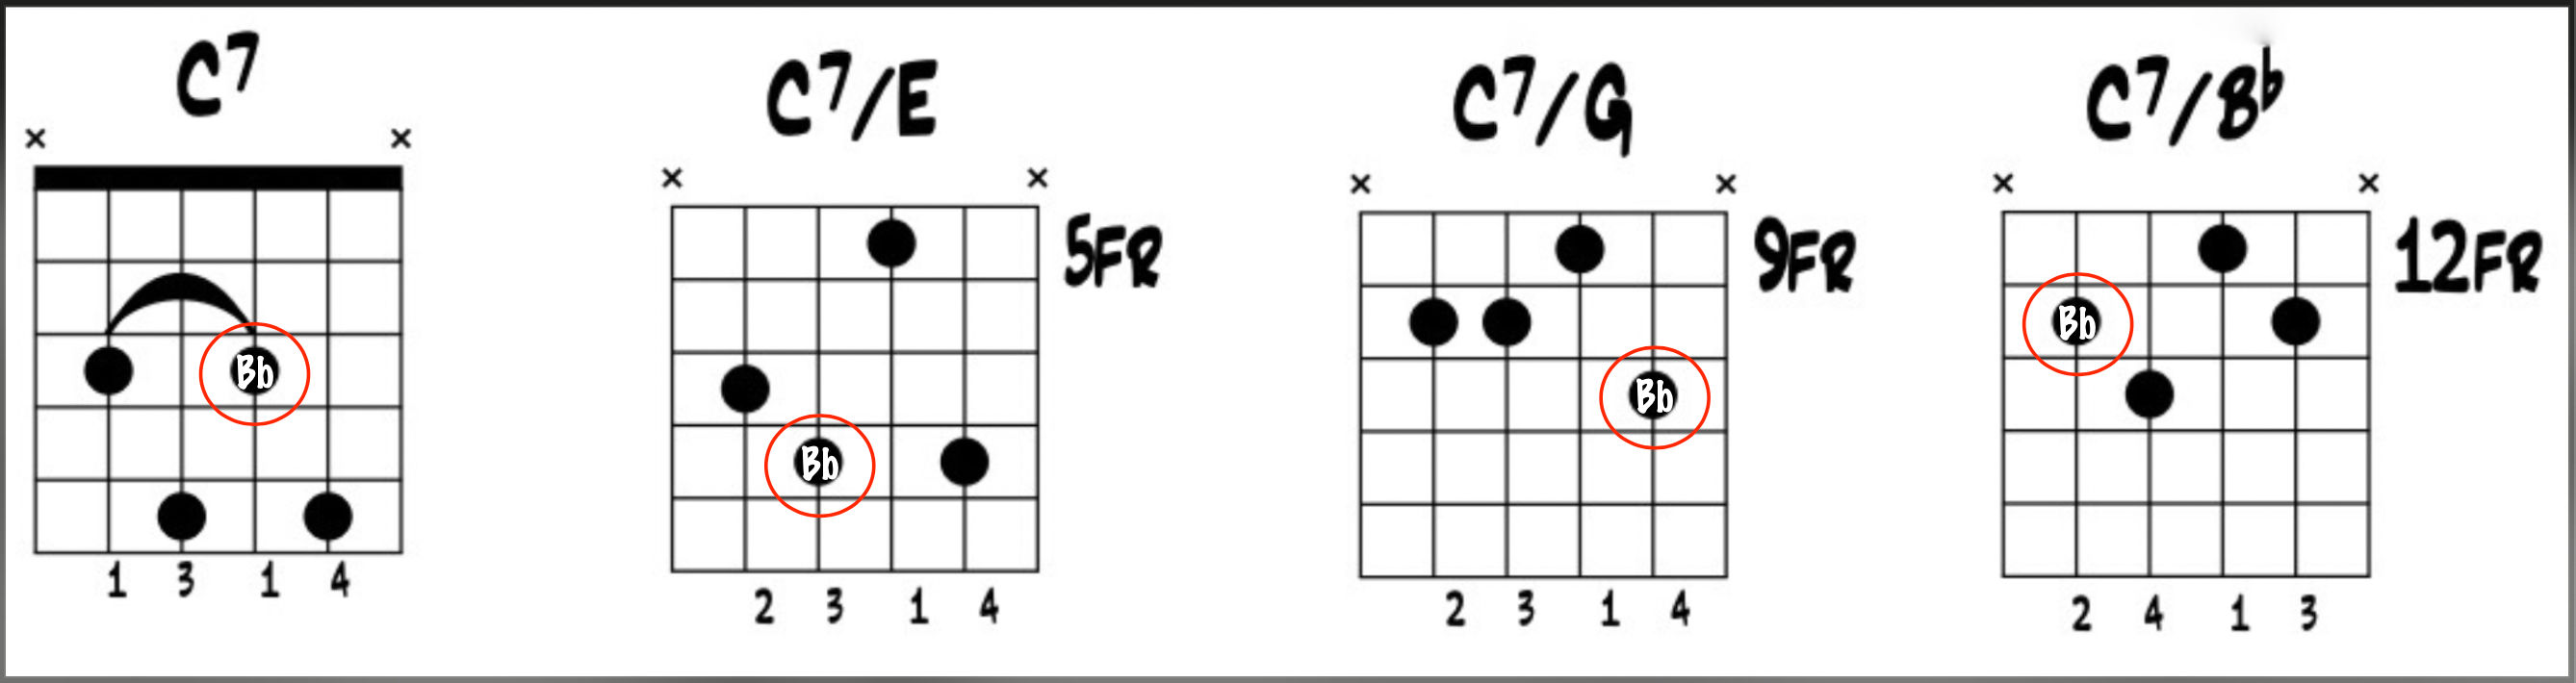 Jazz Guitar: C7 on the B String Group with all inversions